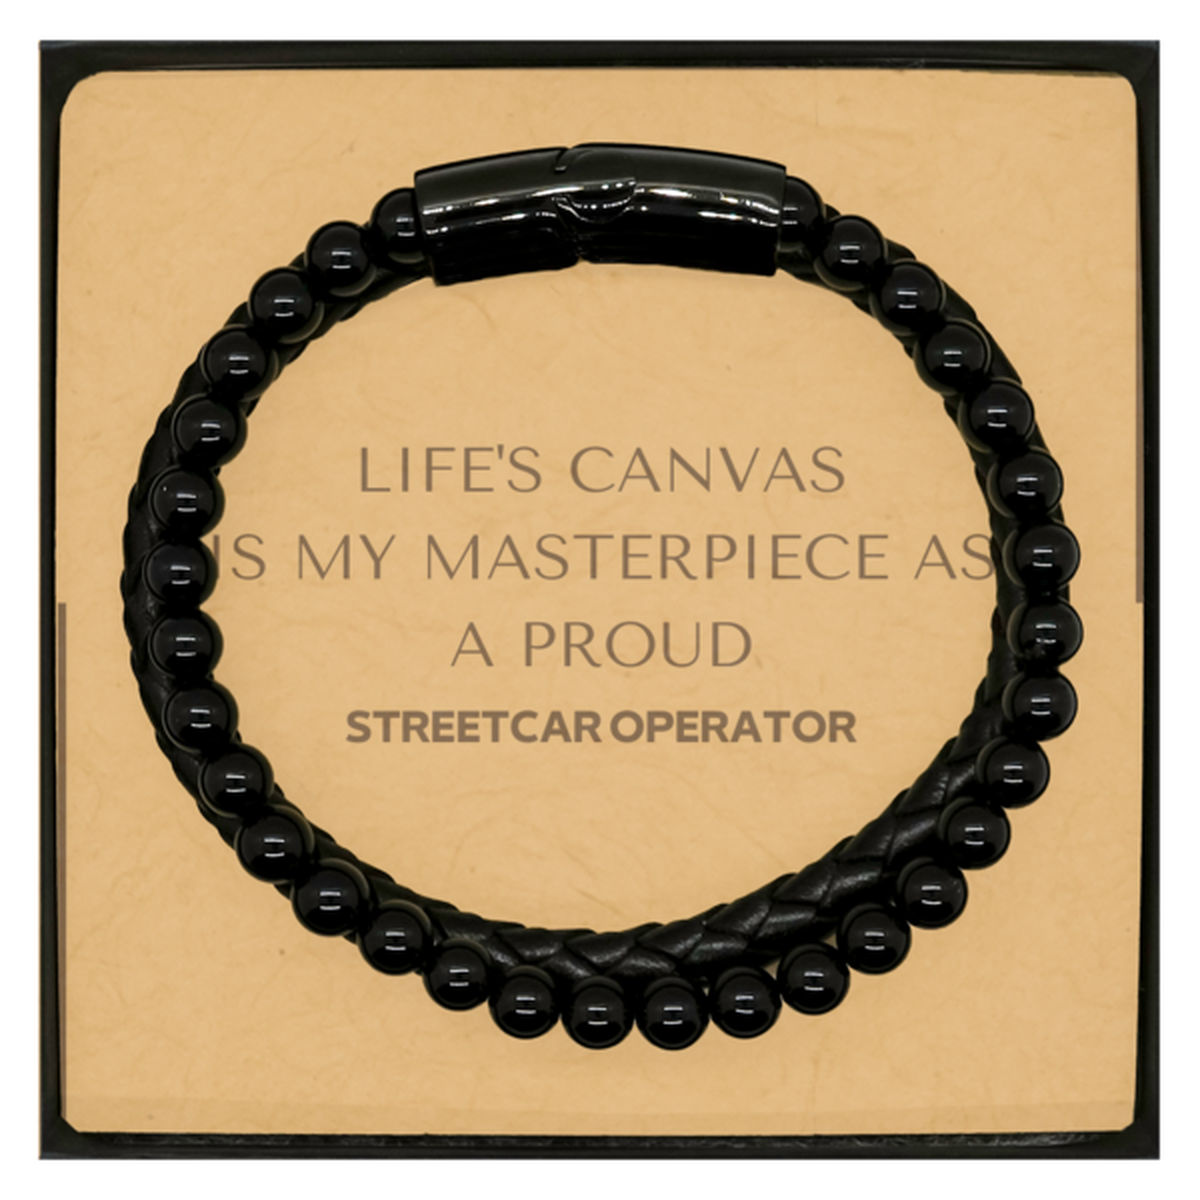 Proud Streetcar Operator Gifts, Life's canvas is my masterpiece, Epic Birthday Christmas Unique Stone Leather Bracelets For Streetcar Operator, Coworkers, Men, Women, Friends